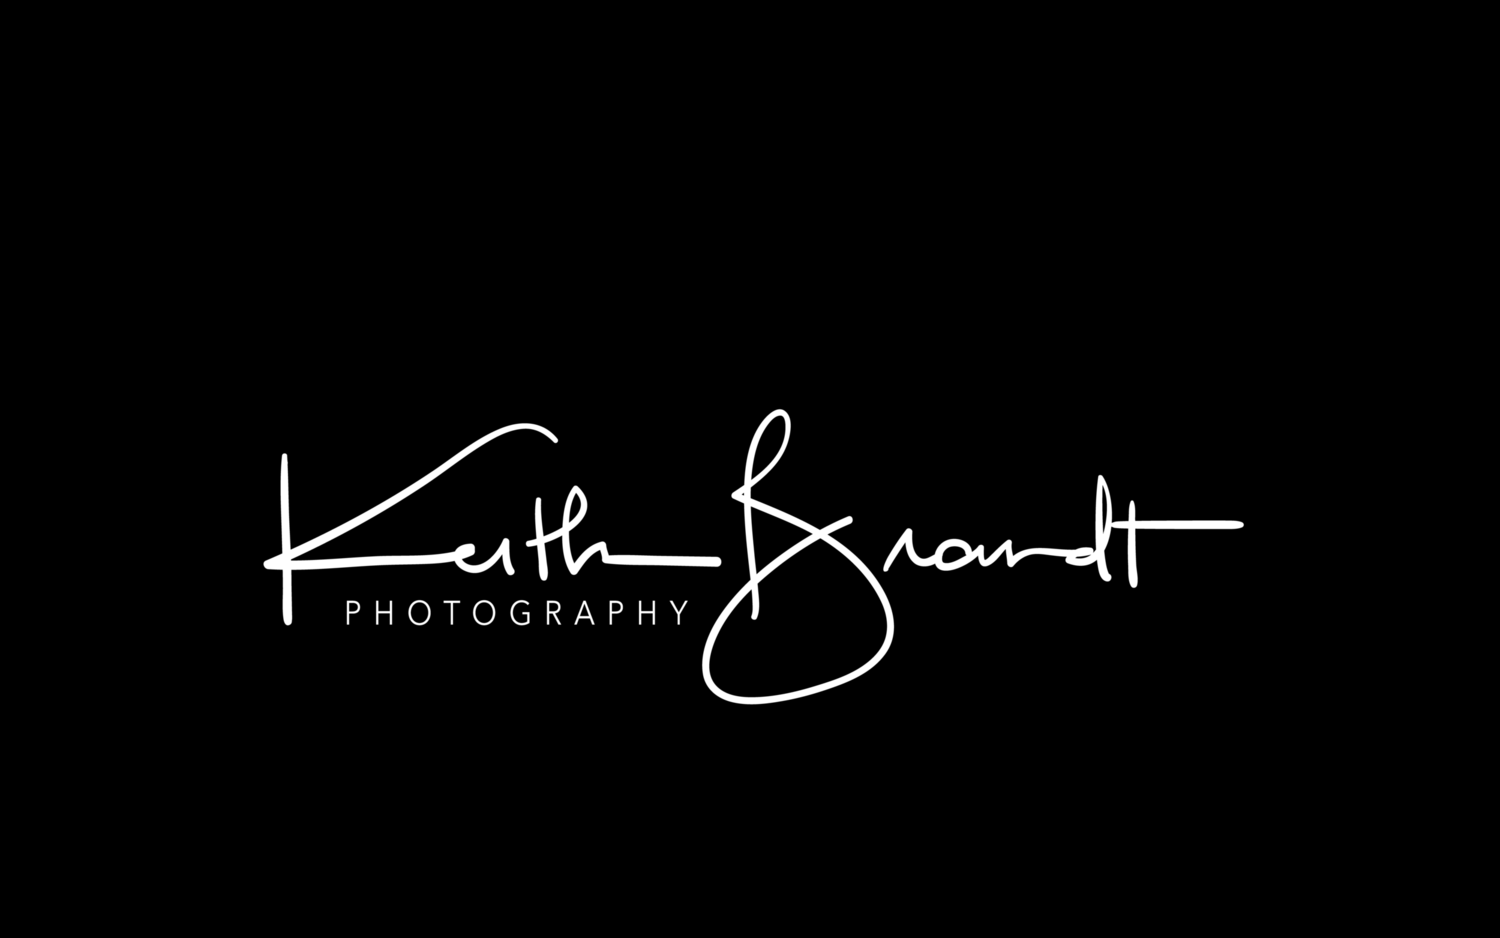 Keith Brandt Photography